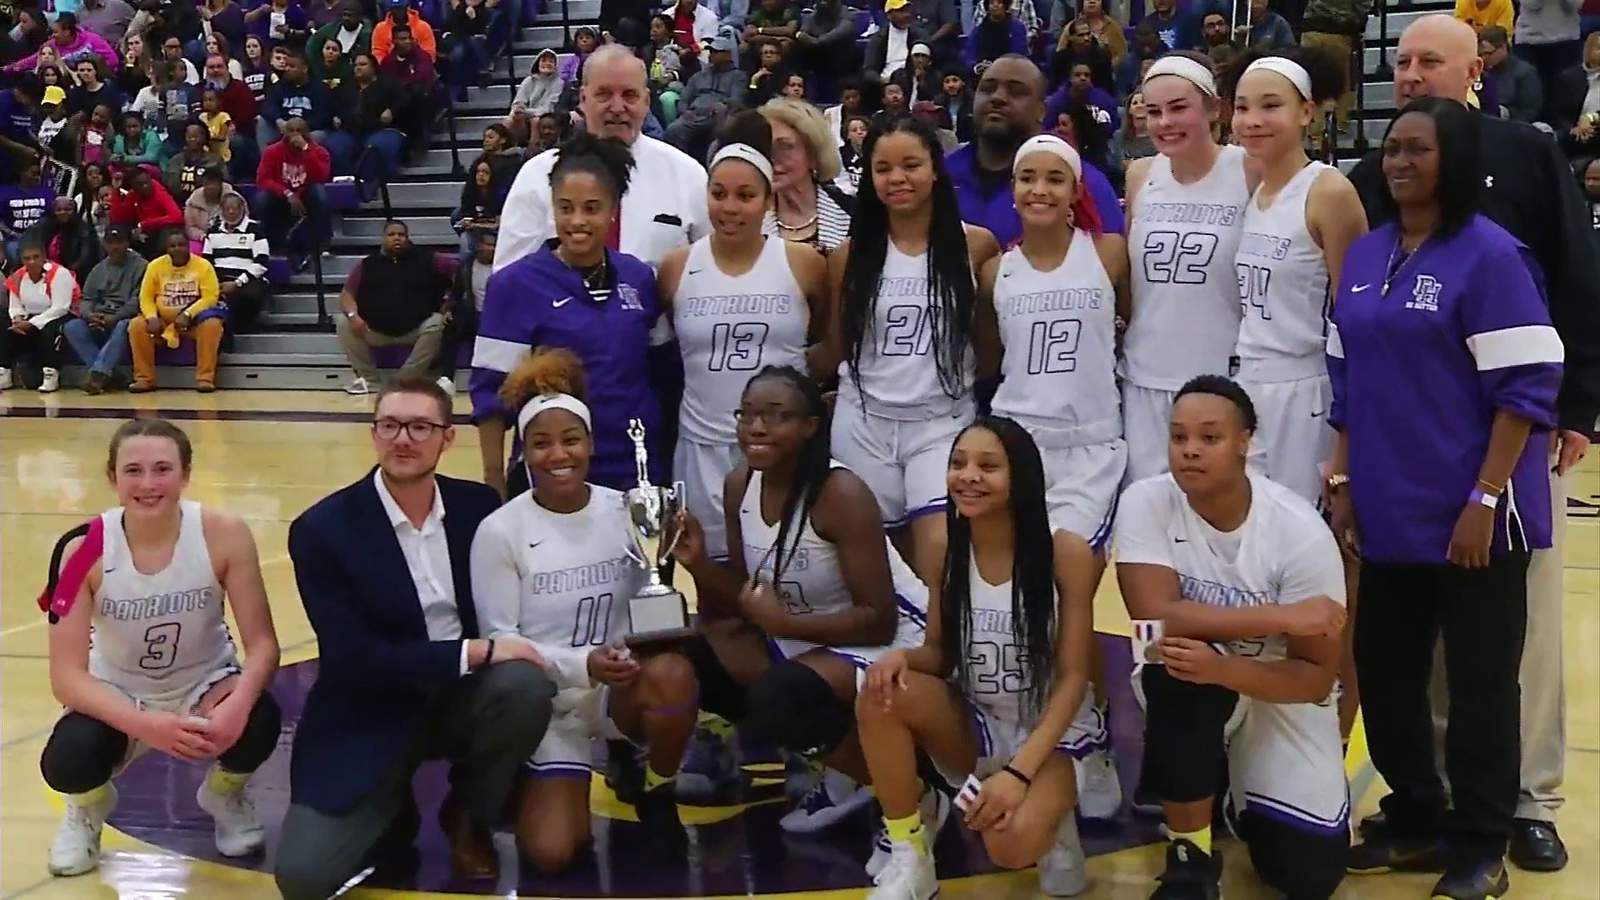 HIGHLIGHTS: Patrick Henry boys and girls clinch Region 5D titles